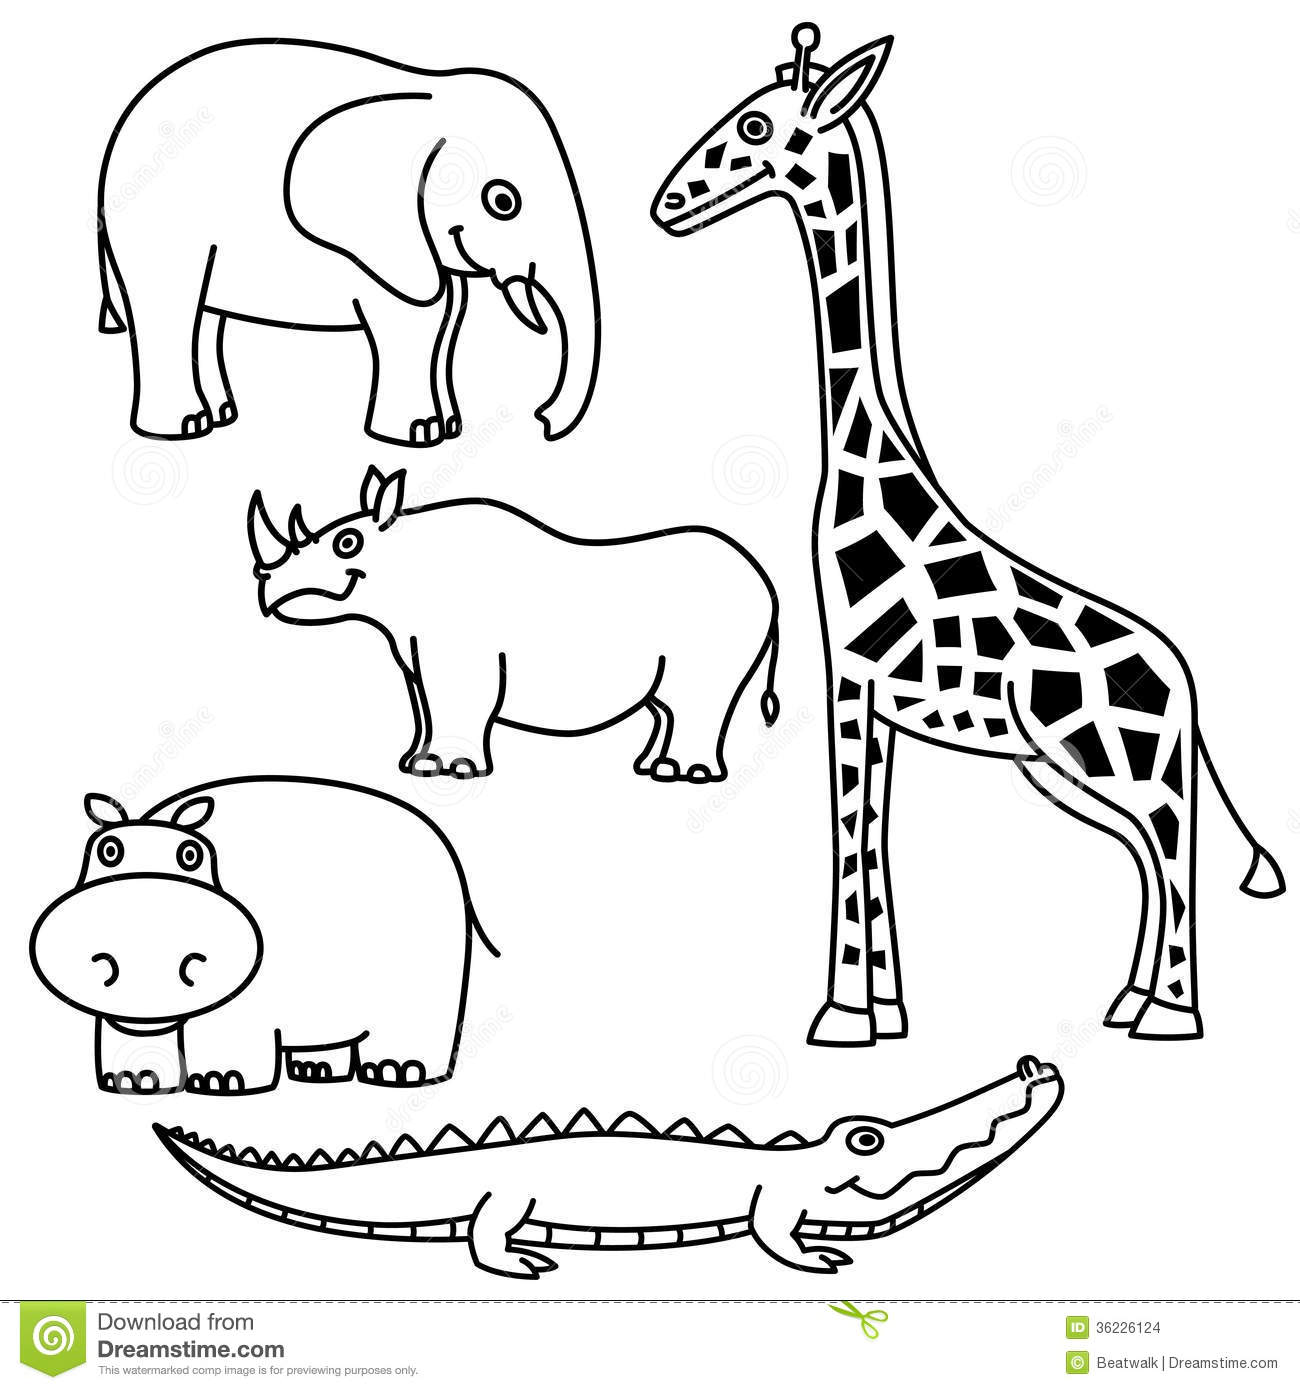 Animal outlines clipart 5 » Clipart Station.